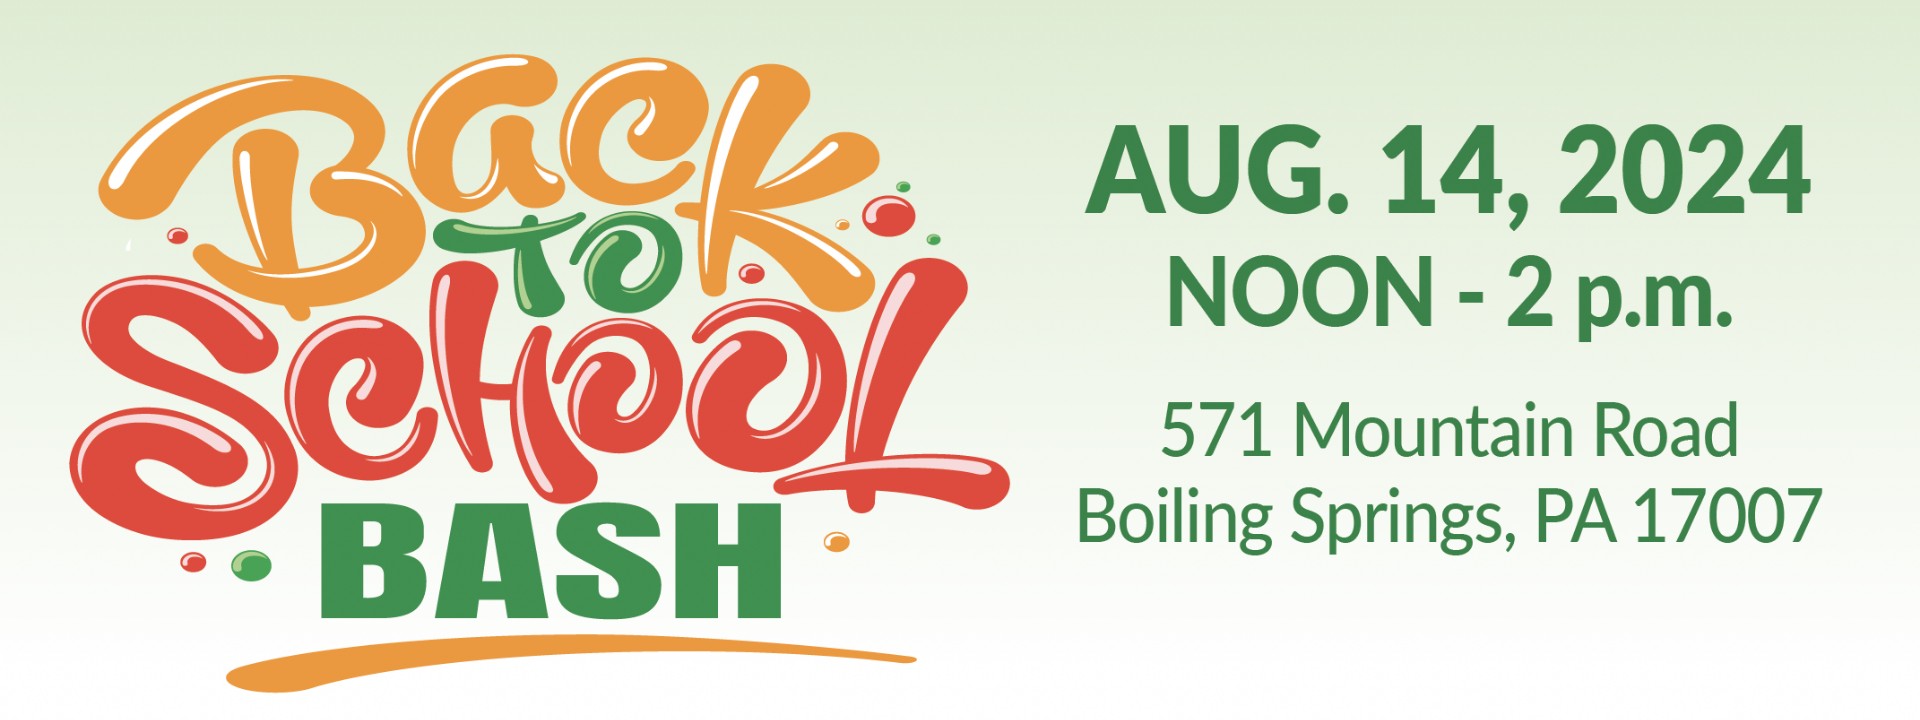 Diakon Youth Services Back to School Bash